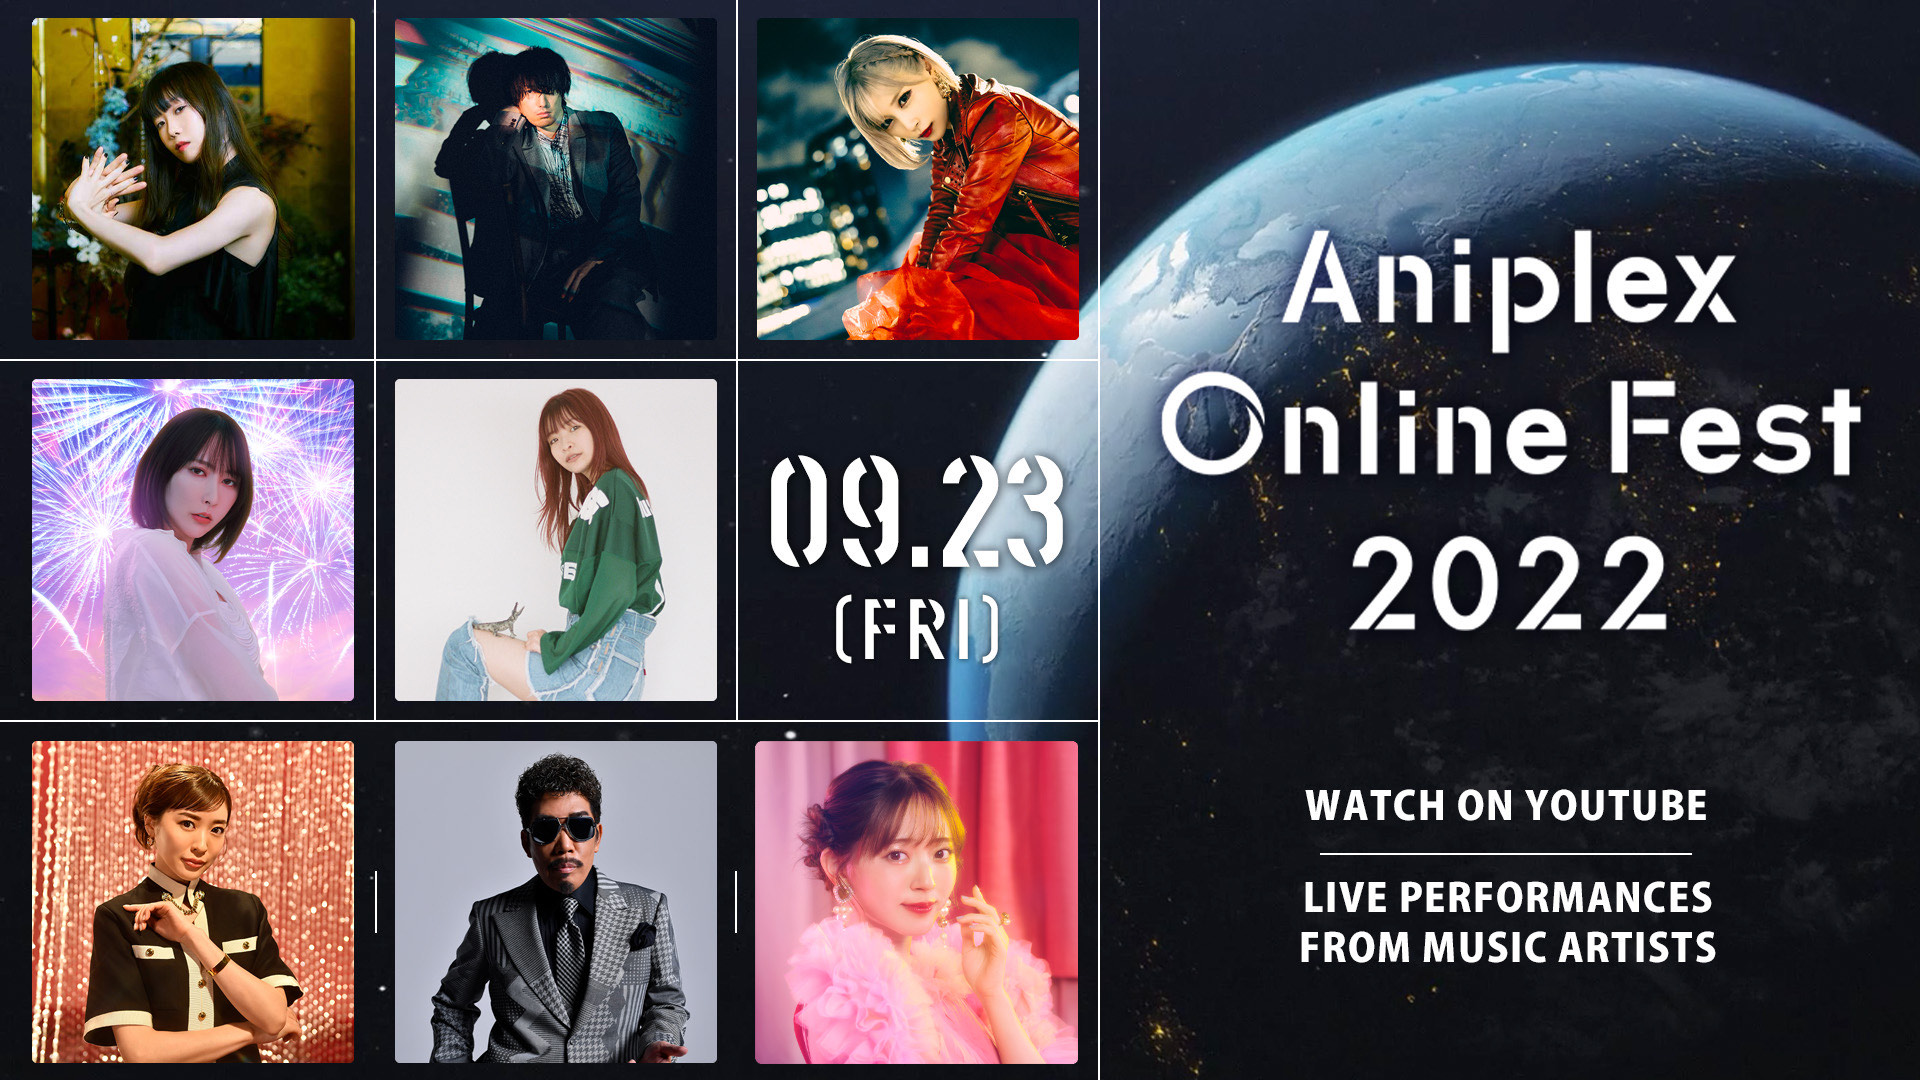 Where to Watch Aniplex Online Fest 2022 As It Happens